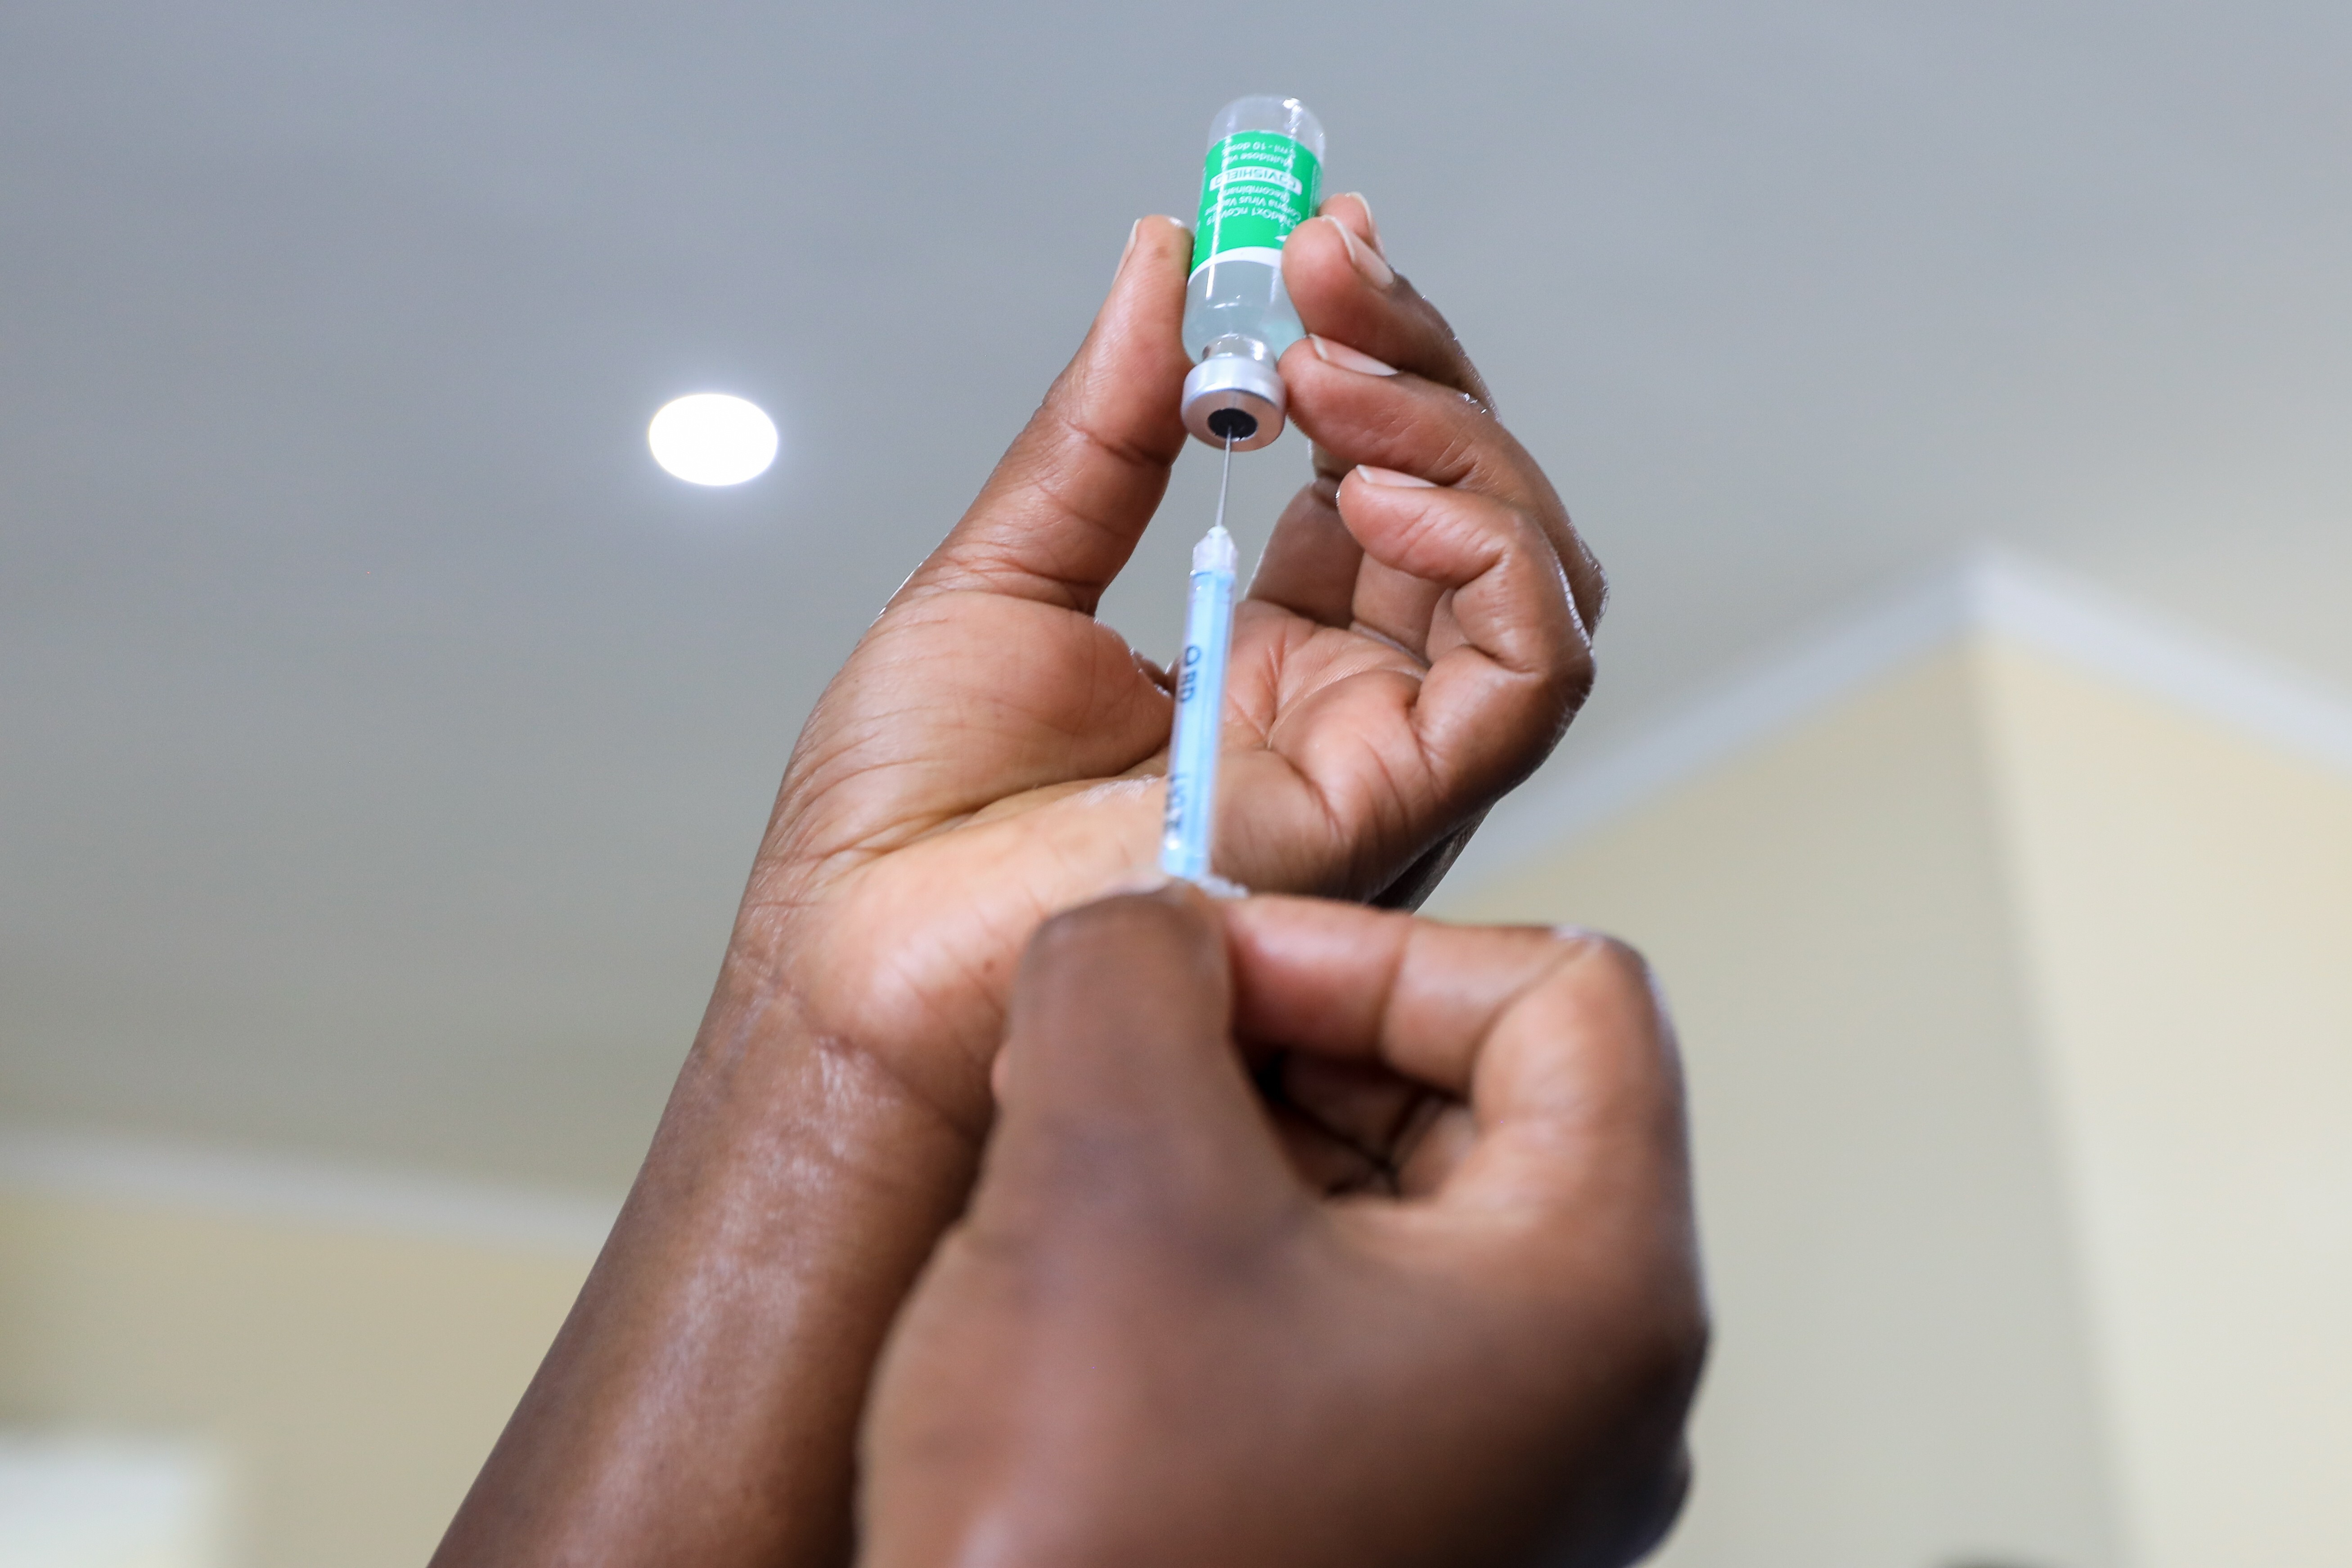 A Kenyan health care worker prepares to administer a dose of the Oxford/AstraZeneca Covid-19 vaccine. Many poorer countries are far behind Western nations in their roll-out programmes, being unable to purchase vaccines at the same scale and price. Photo: EPA-EFE